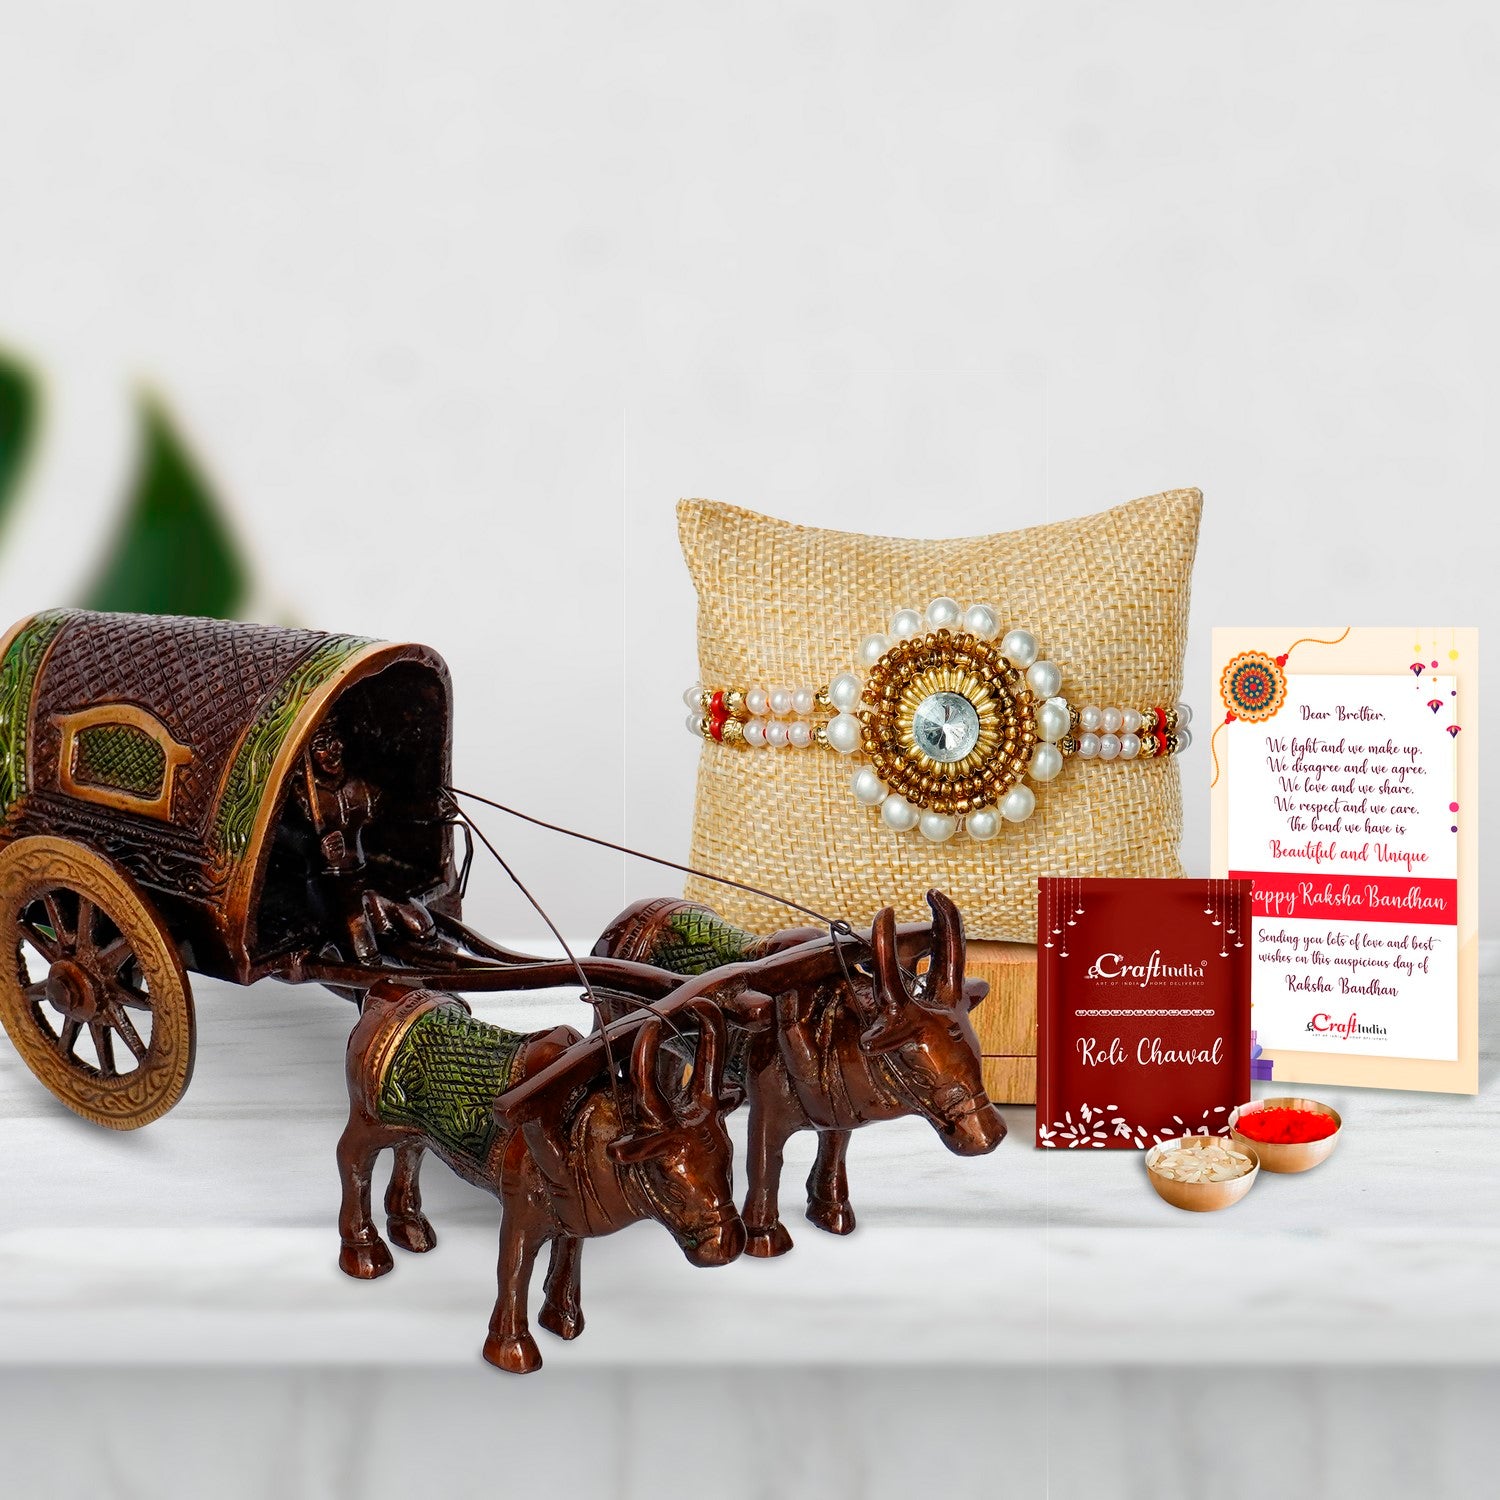 Designer Handcrafted Stone Pearl Rakhi with Brass Brown and Green Antique Finish Closed Bullock Cart  and Roli Chawal Pack, Best Wishes Greeting Card